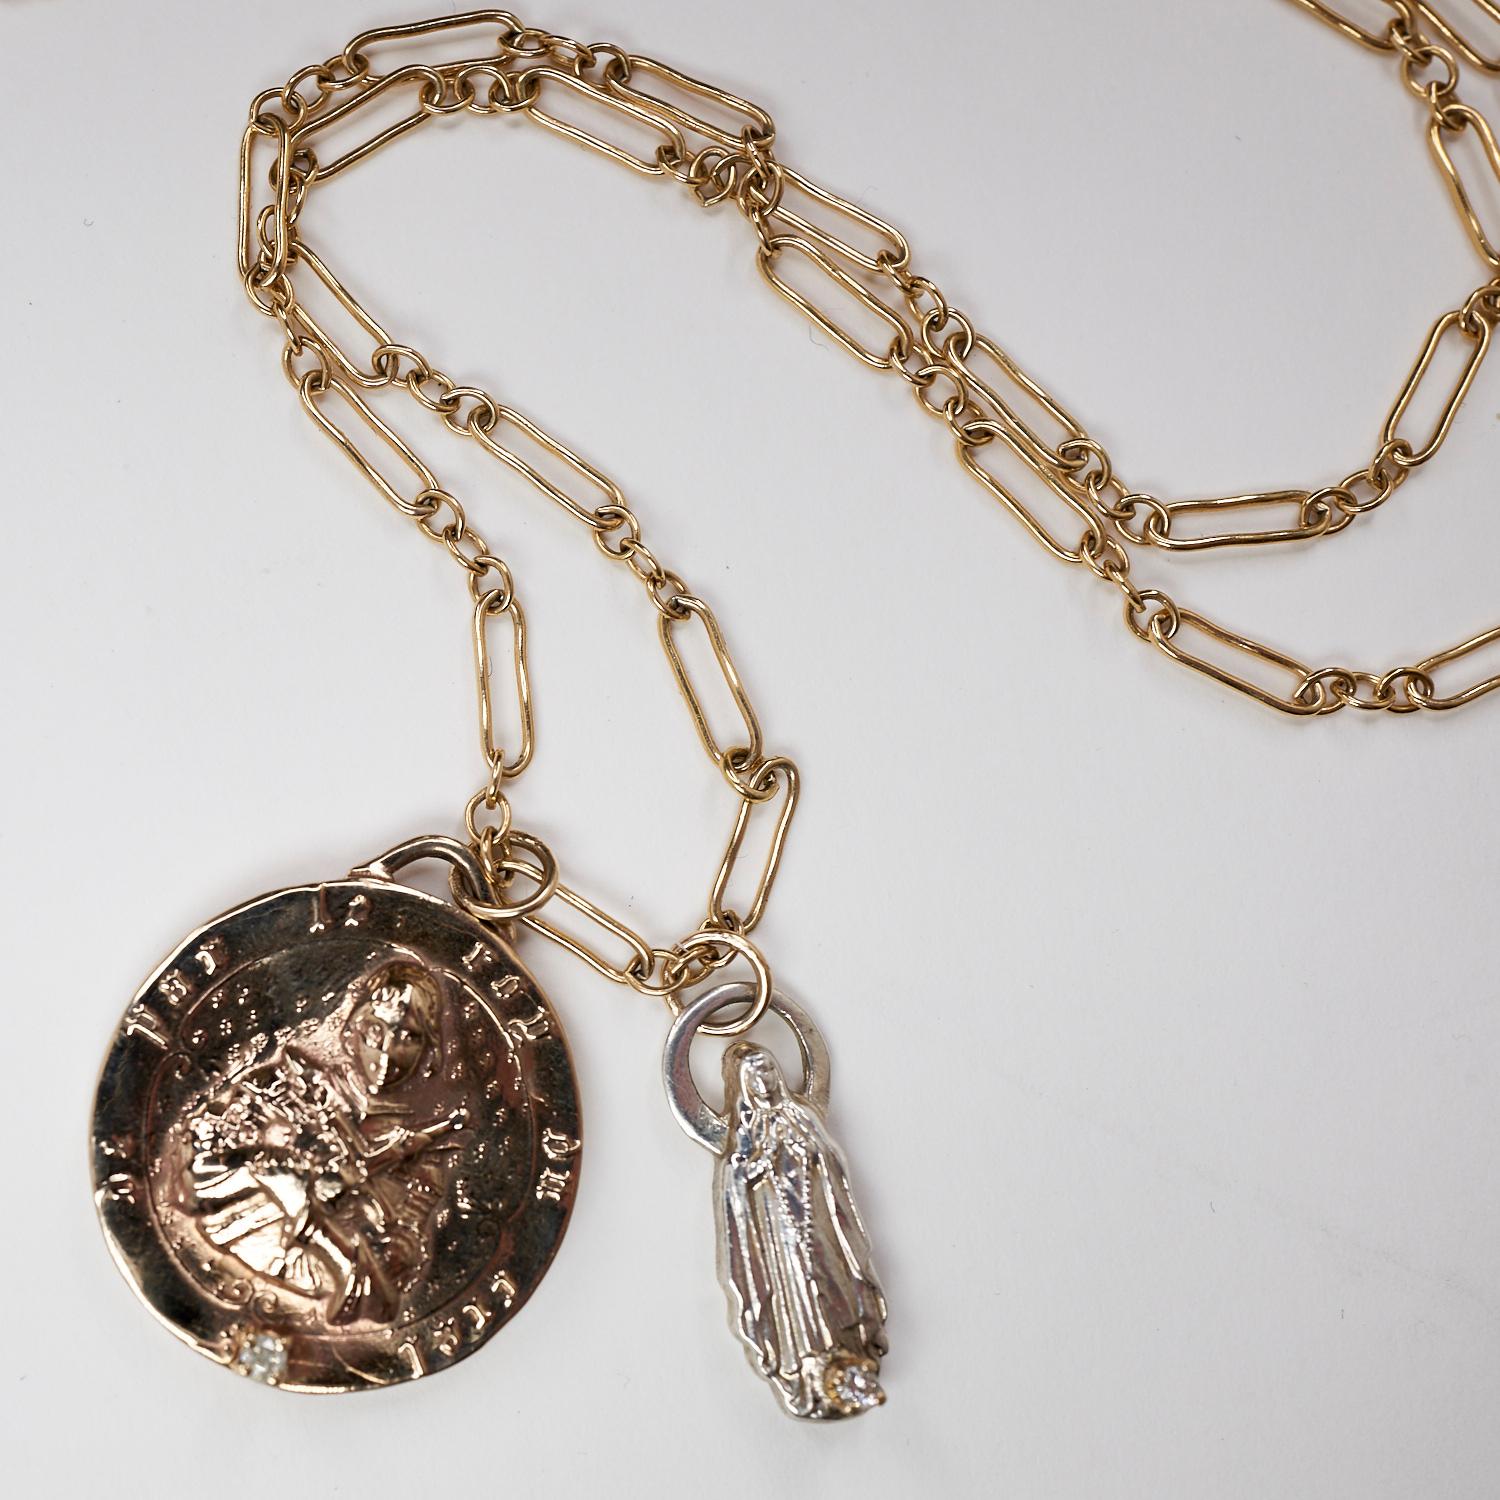 Two White Diamonds Set in Gold Prong on Medal Coin Pendant Joan Of Arc in Bronze and a Silver Virgin Mary Figurine Hanging on a 24